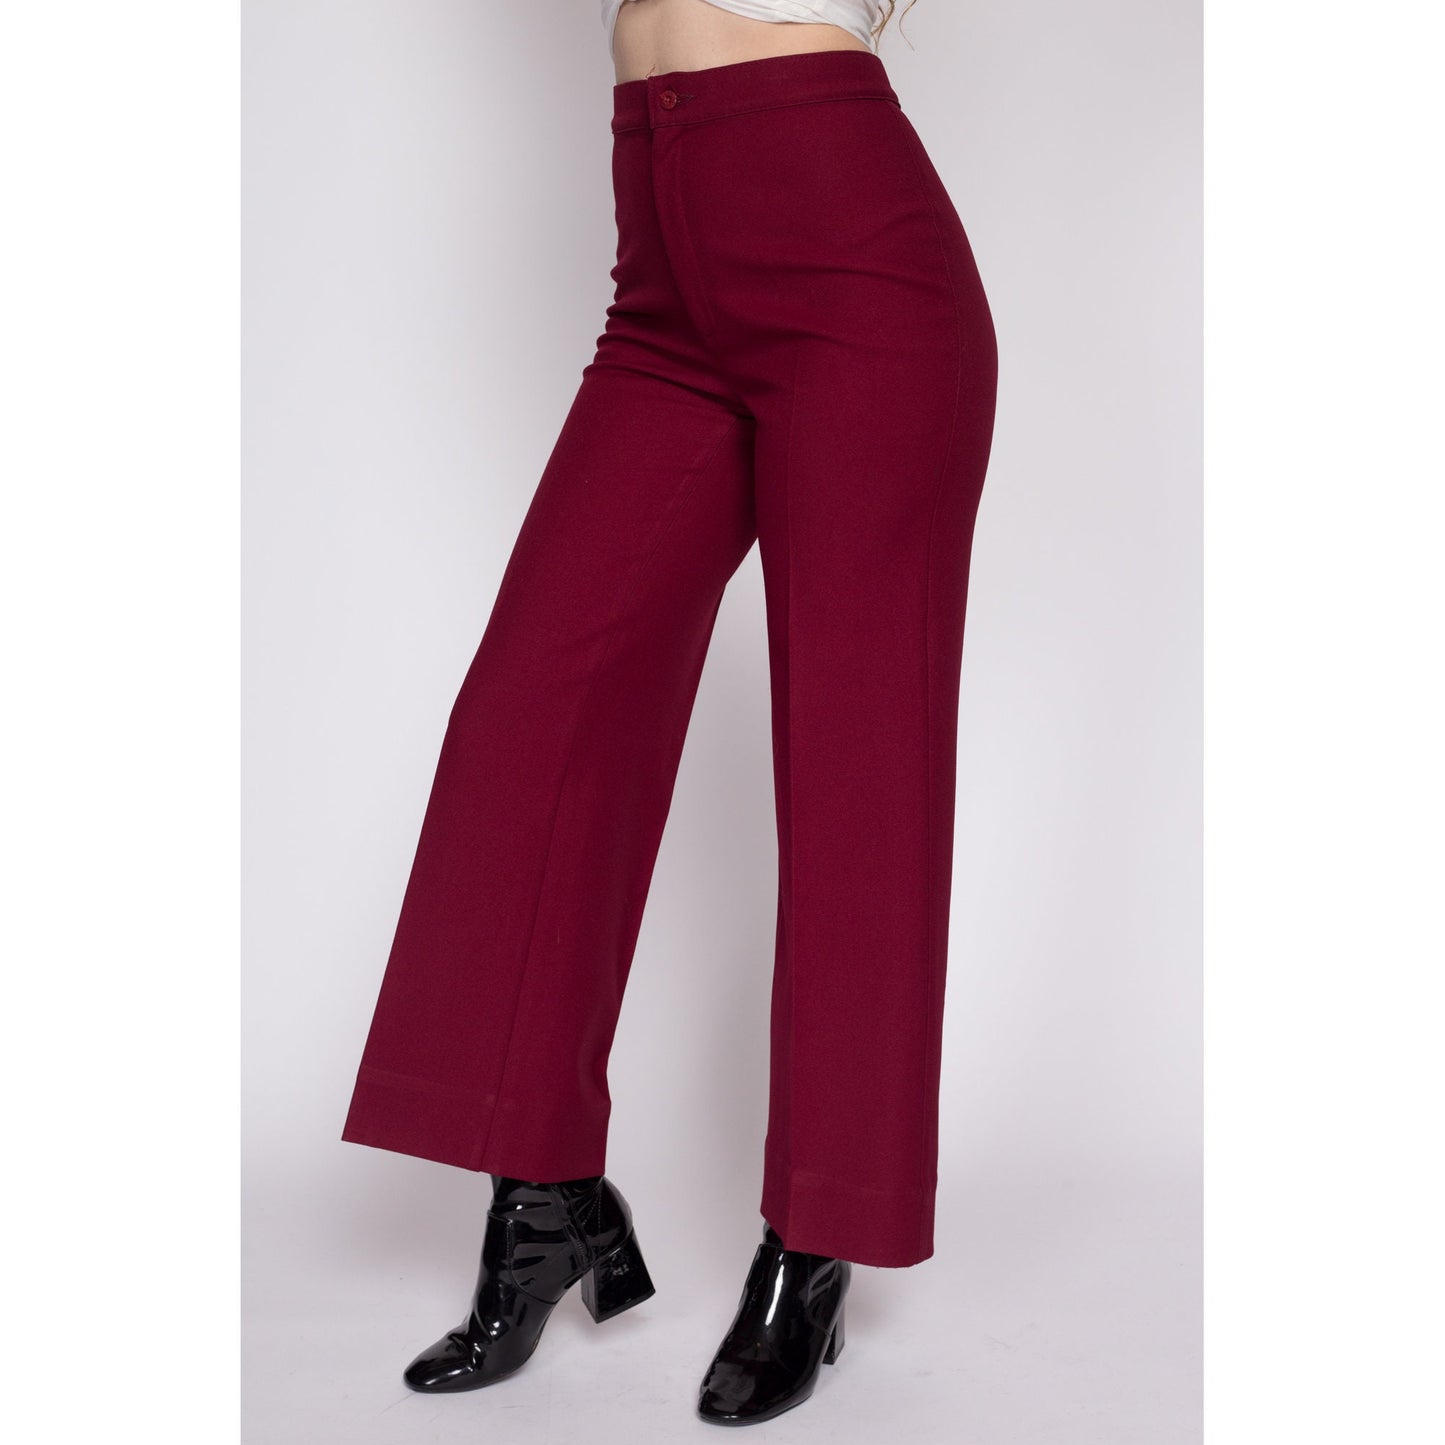 Small 70s Levis Wine Red High Waisted Trousers 27.5" | Vintage Levi's Minimalist Straight Leg Polyester Pants